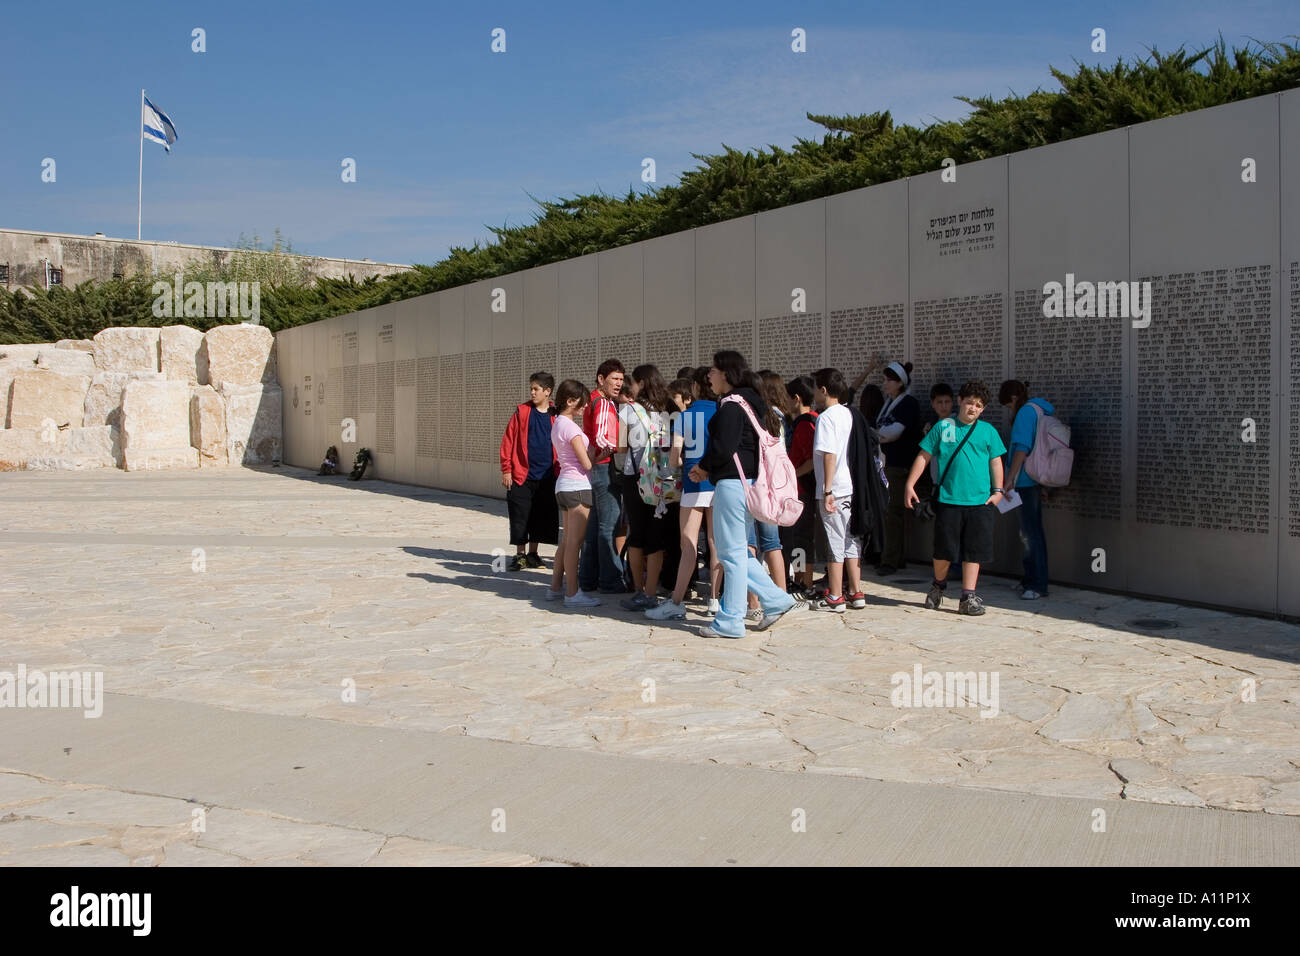 Stock Photo of Visitors at The Memorial Wall at Latrun Yad-Lashirion Armored Corps Memorial Museum in Israel Stock Photo